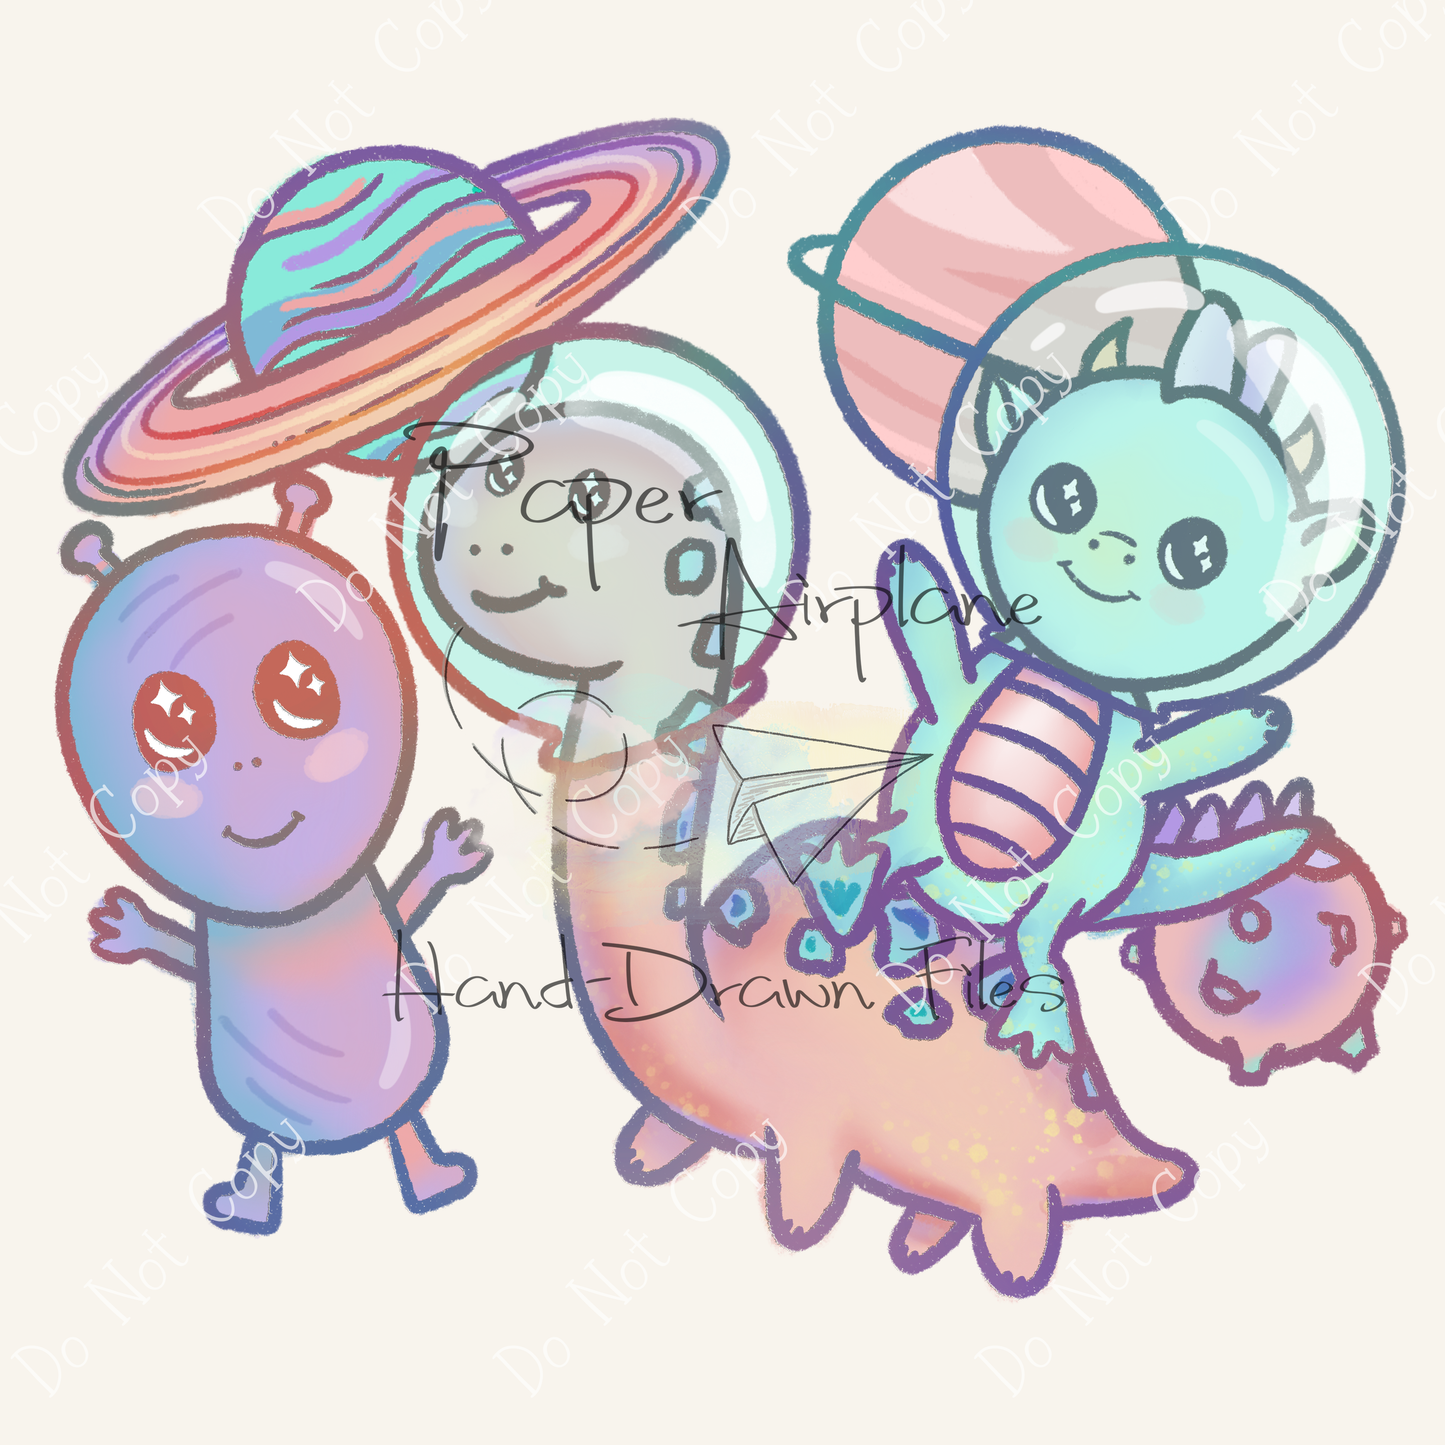 Space Creatures (Cotton Candy)